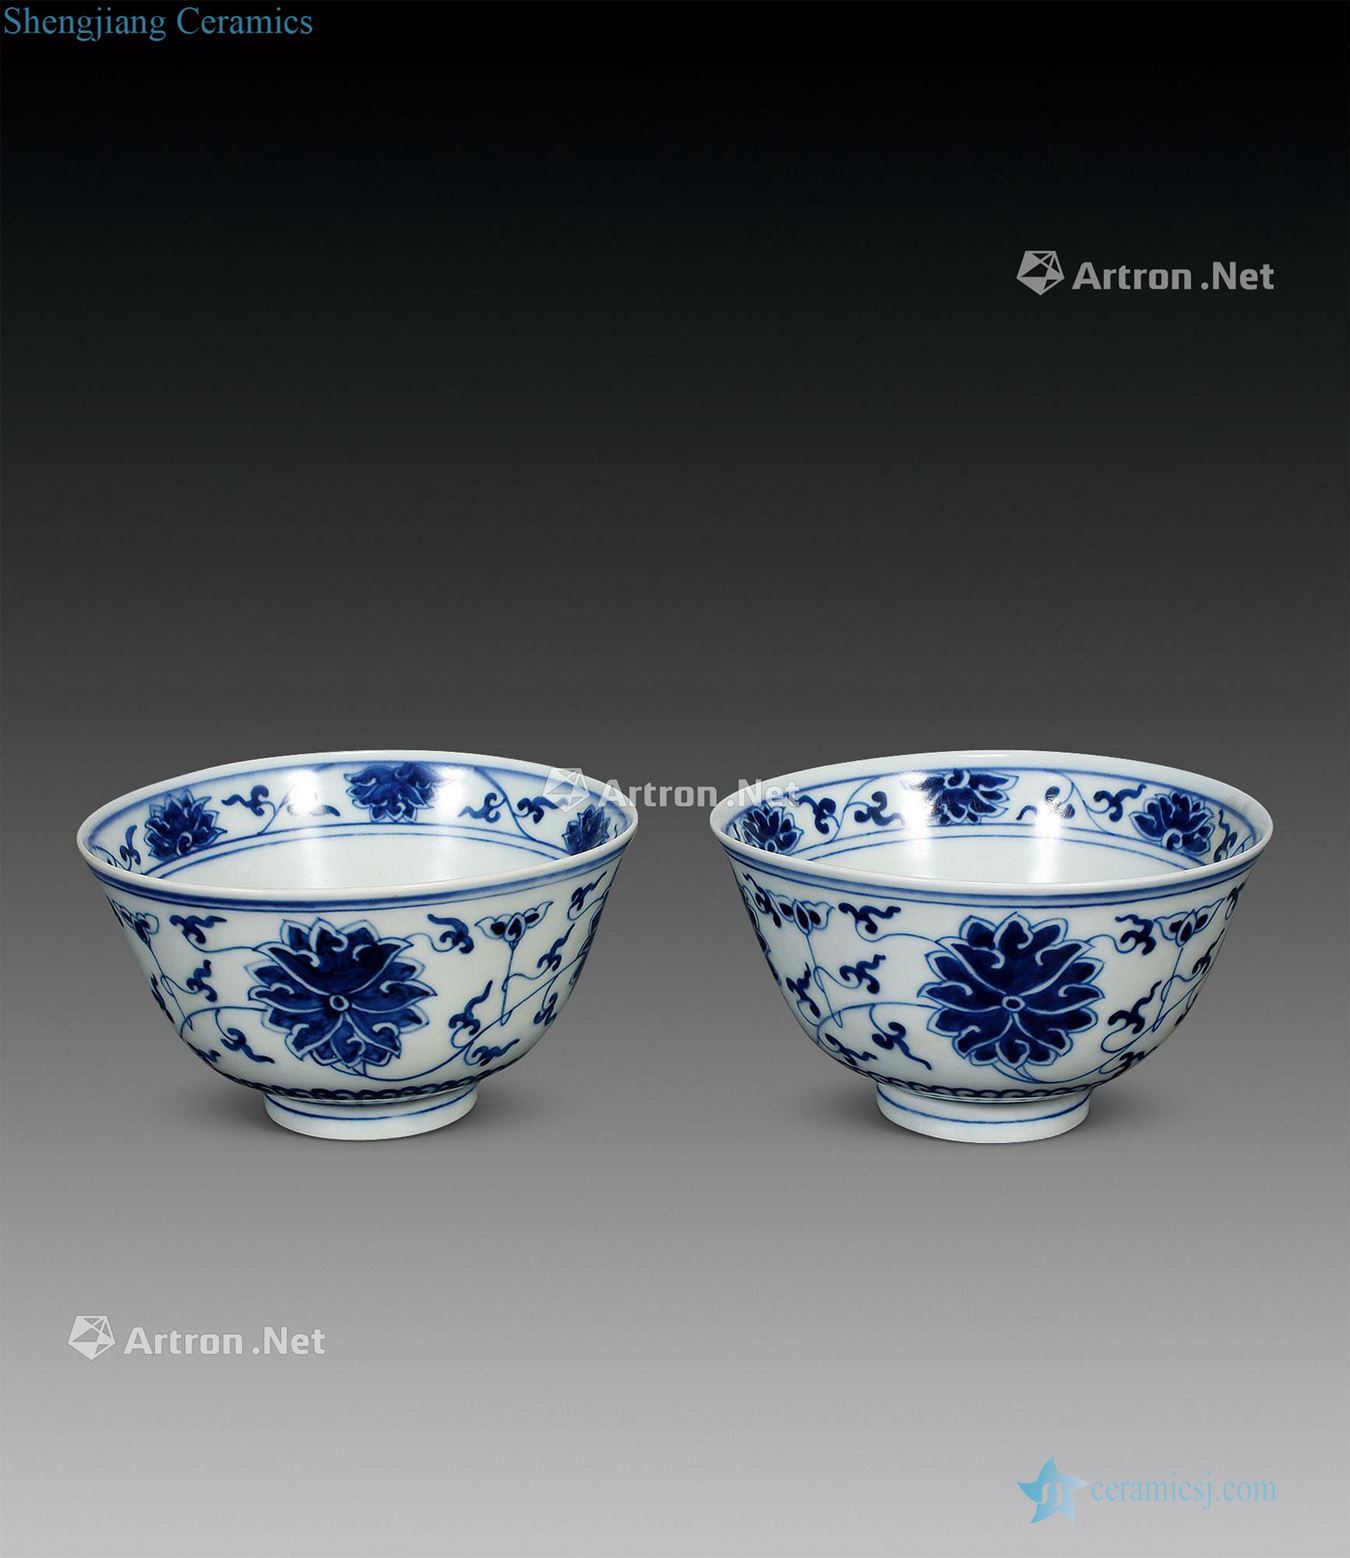 "Qing guangxu reign of qing emperor guangxu years," kind of blue and white tie up branch lotus bowl (a)